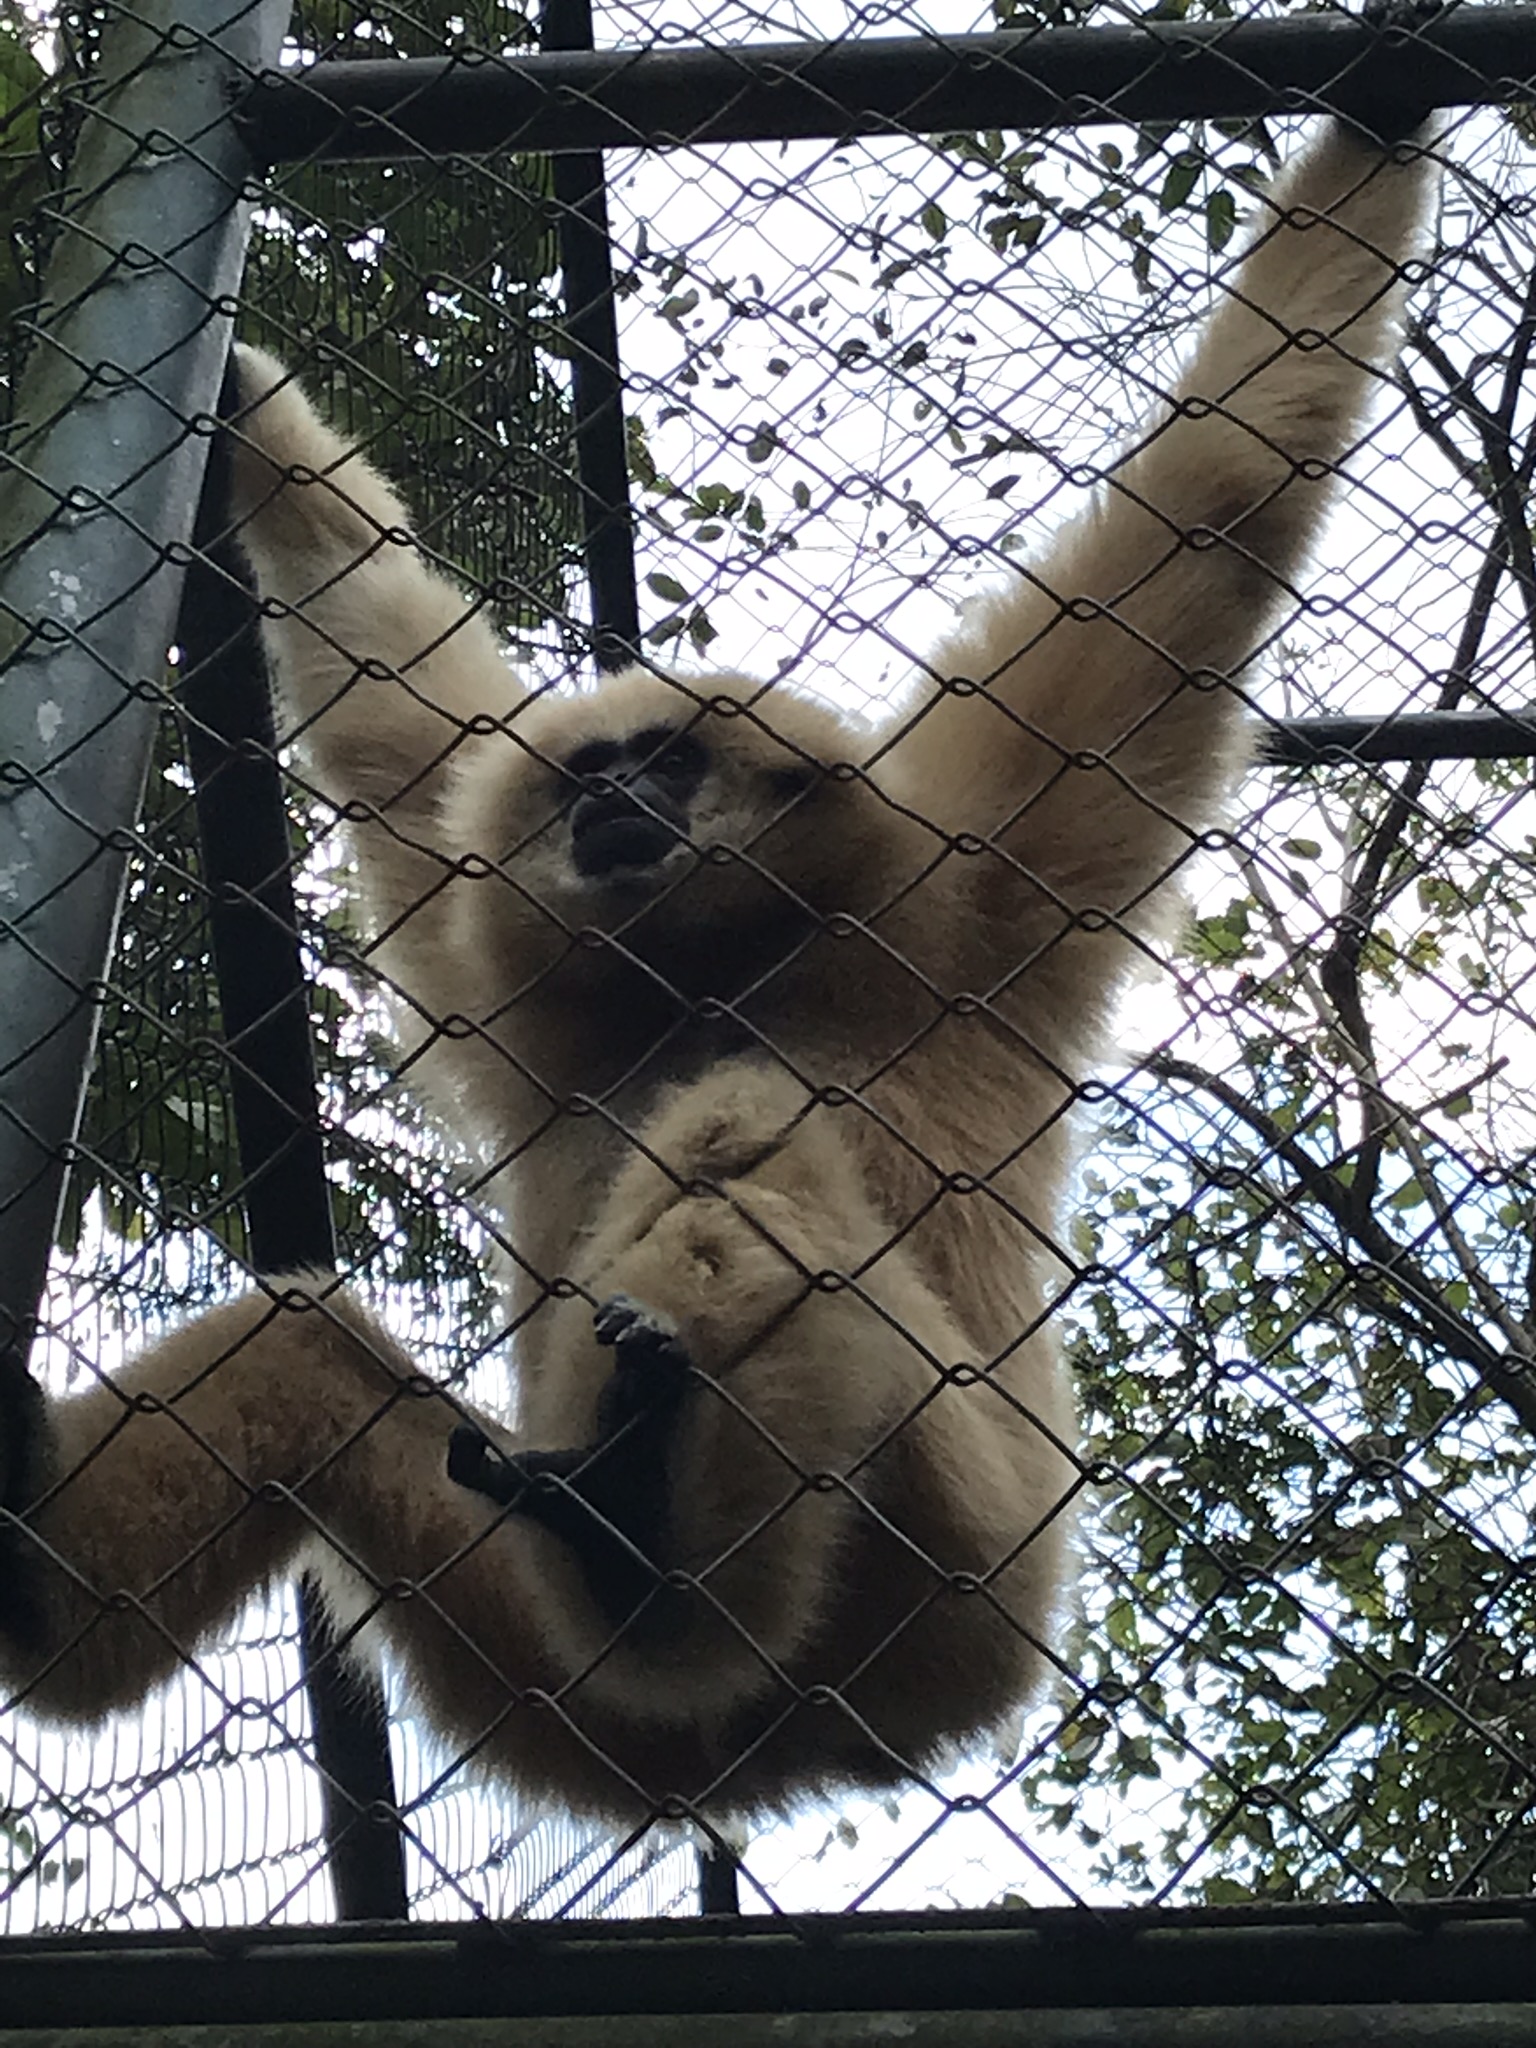 One of the many rescued gibbons at WFFT